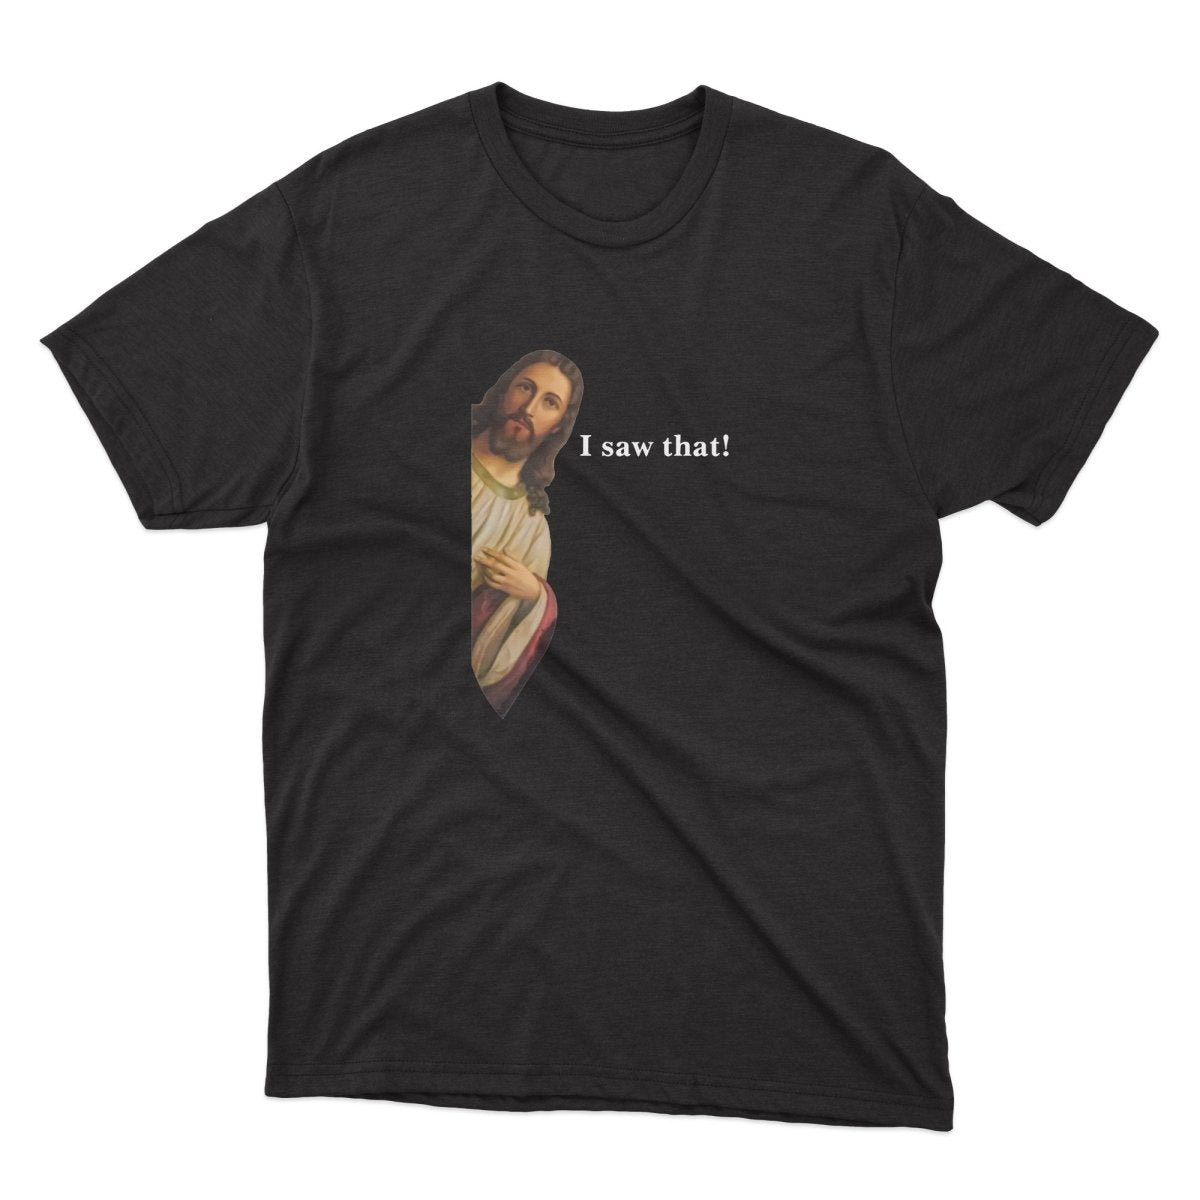 Jesus I Saw That Shirt - stickerbullJesus I Saw That ShirtShirtsPrintifystickerbull16690464523079271511BlackSa black t - shirt with a picture of jesus holding a book